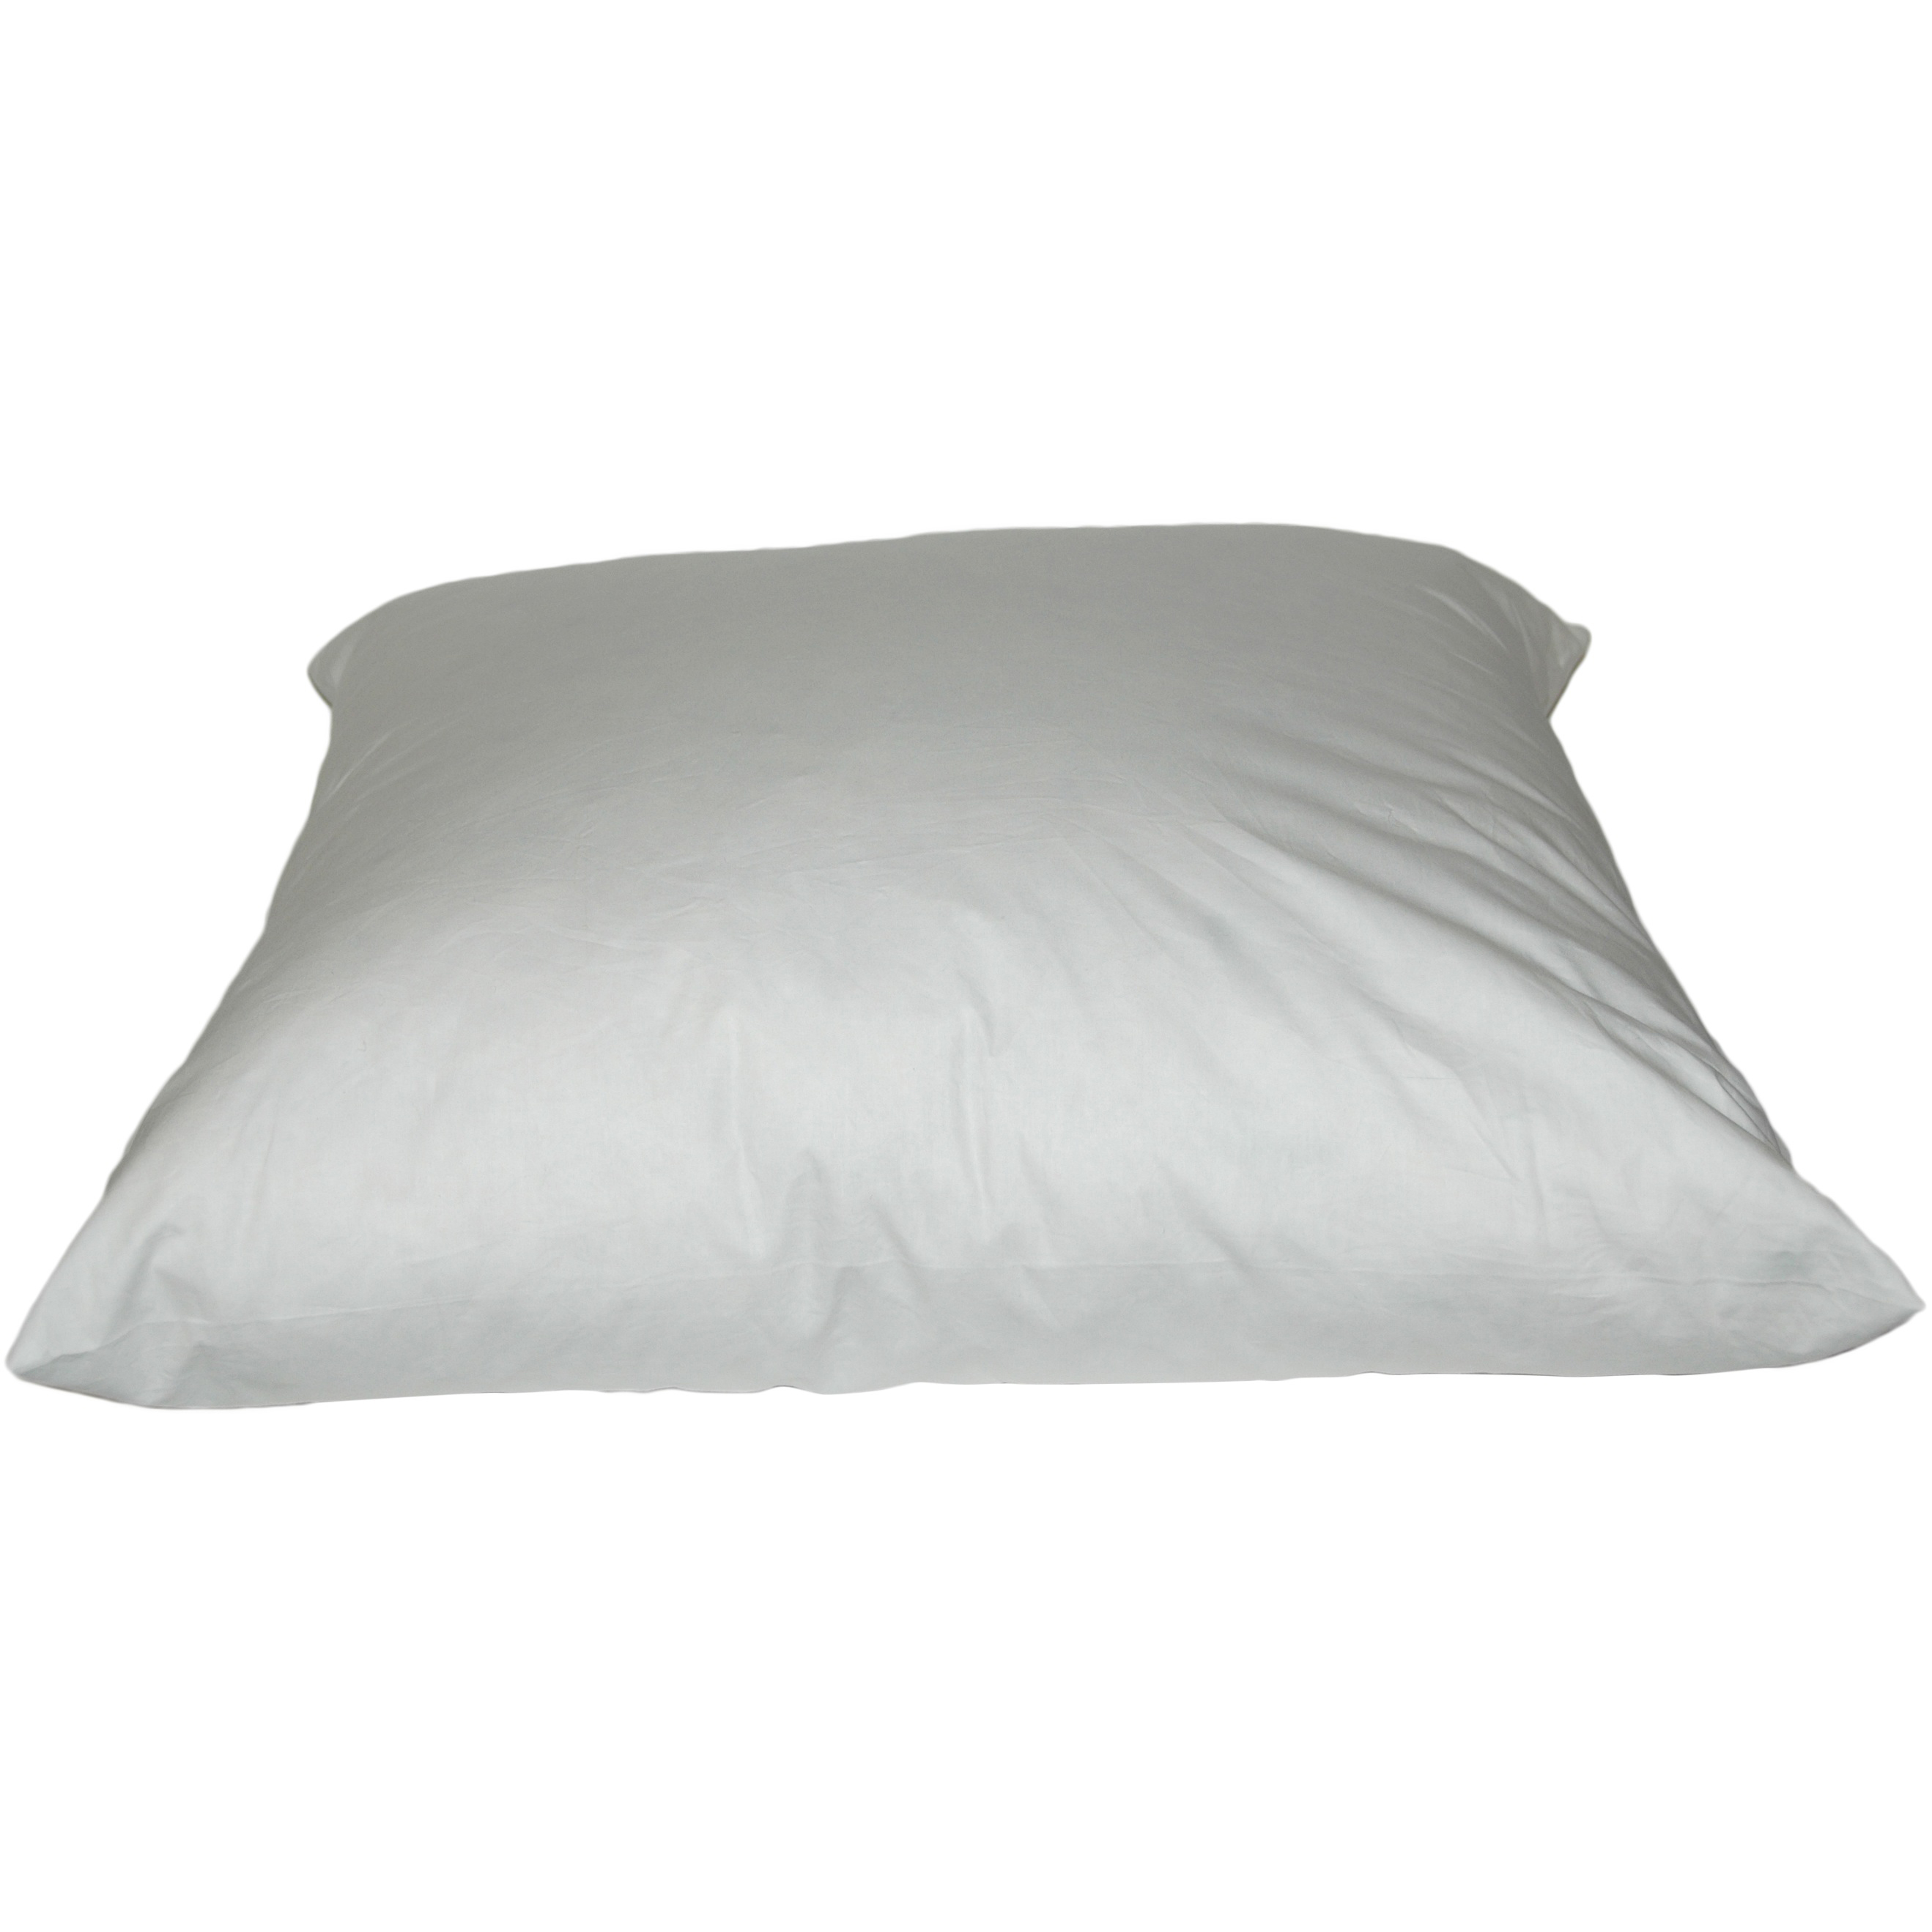 Down & Feather Pillows 10/90 Blend 20 inch